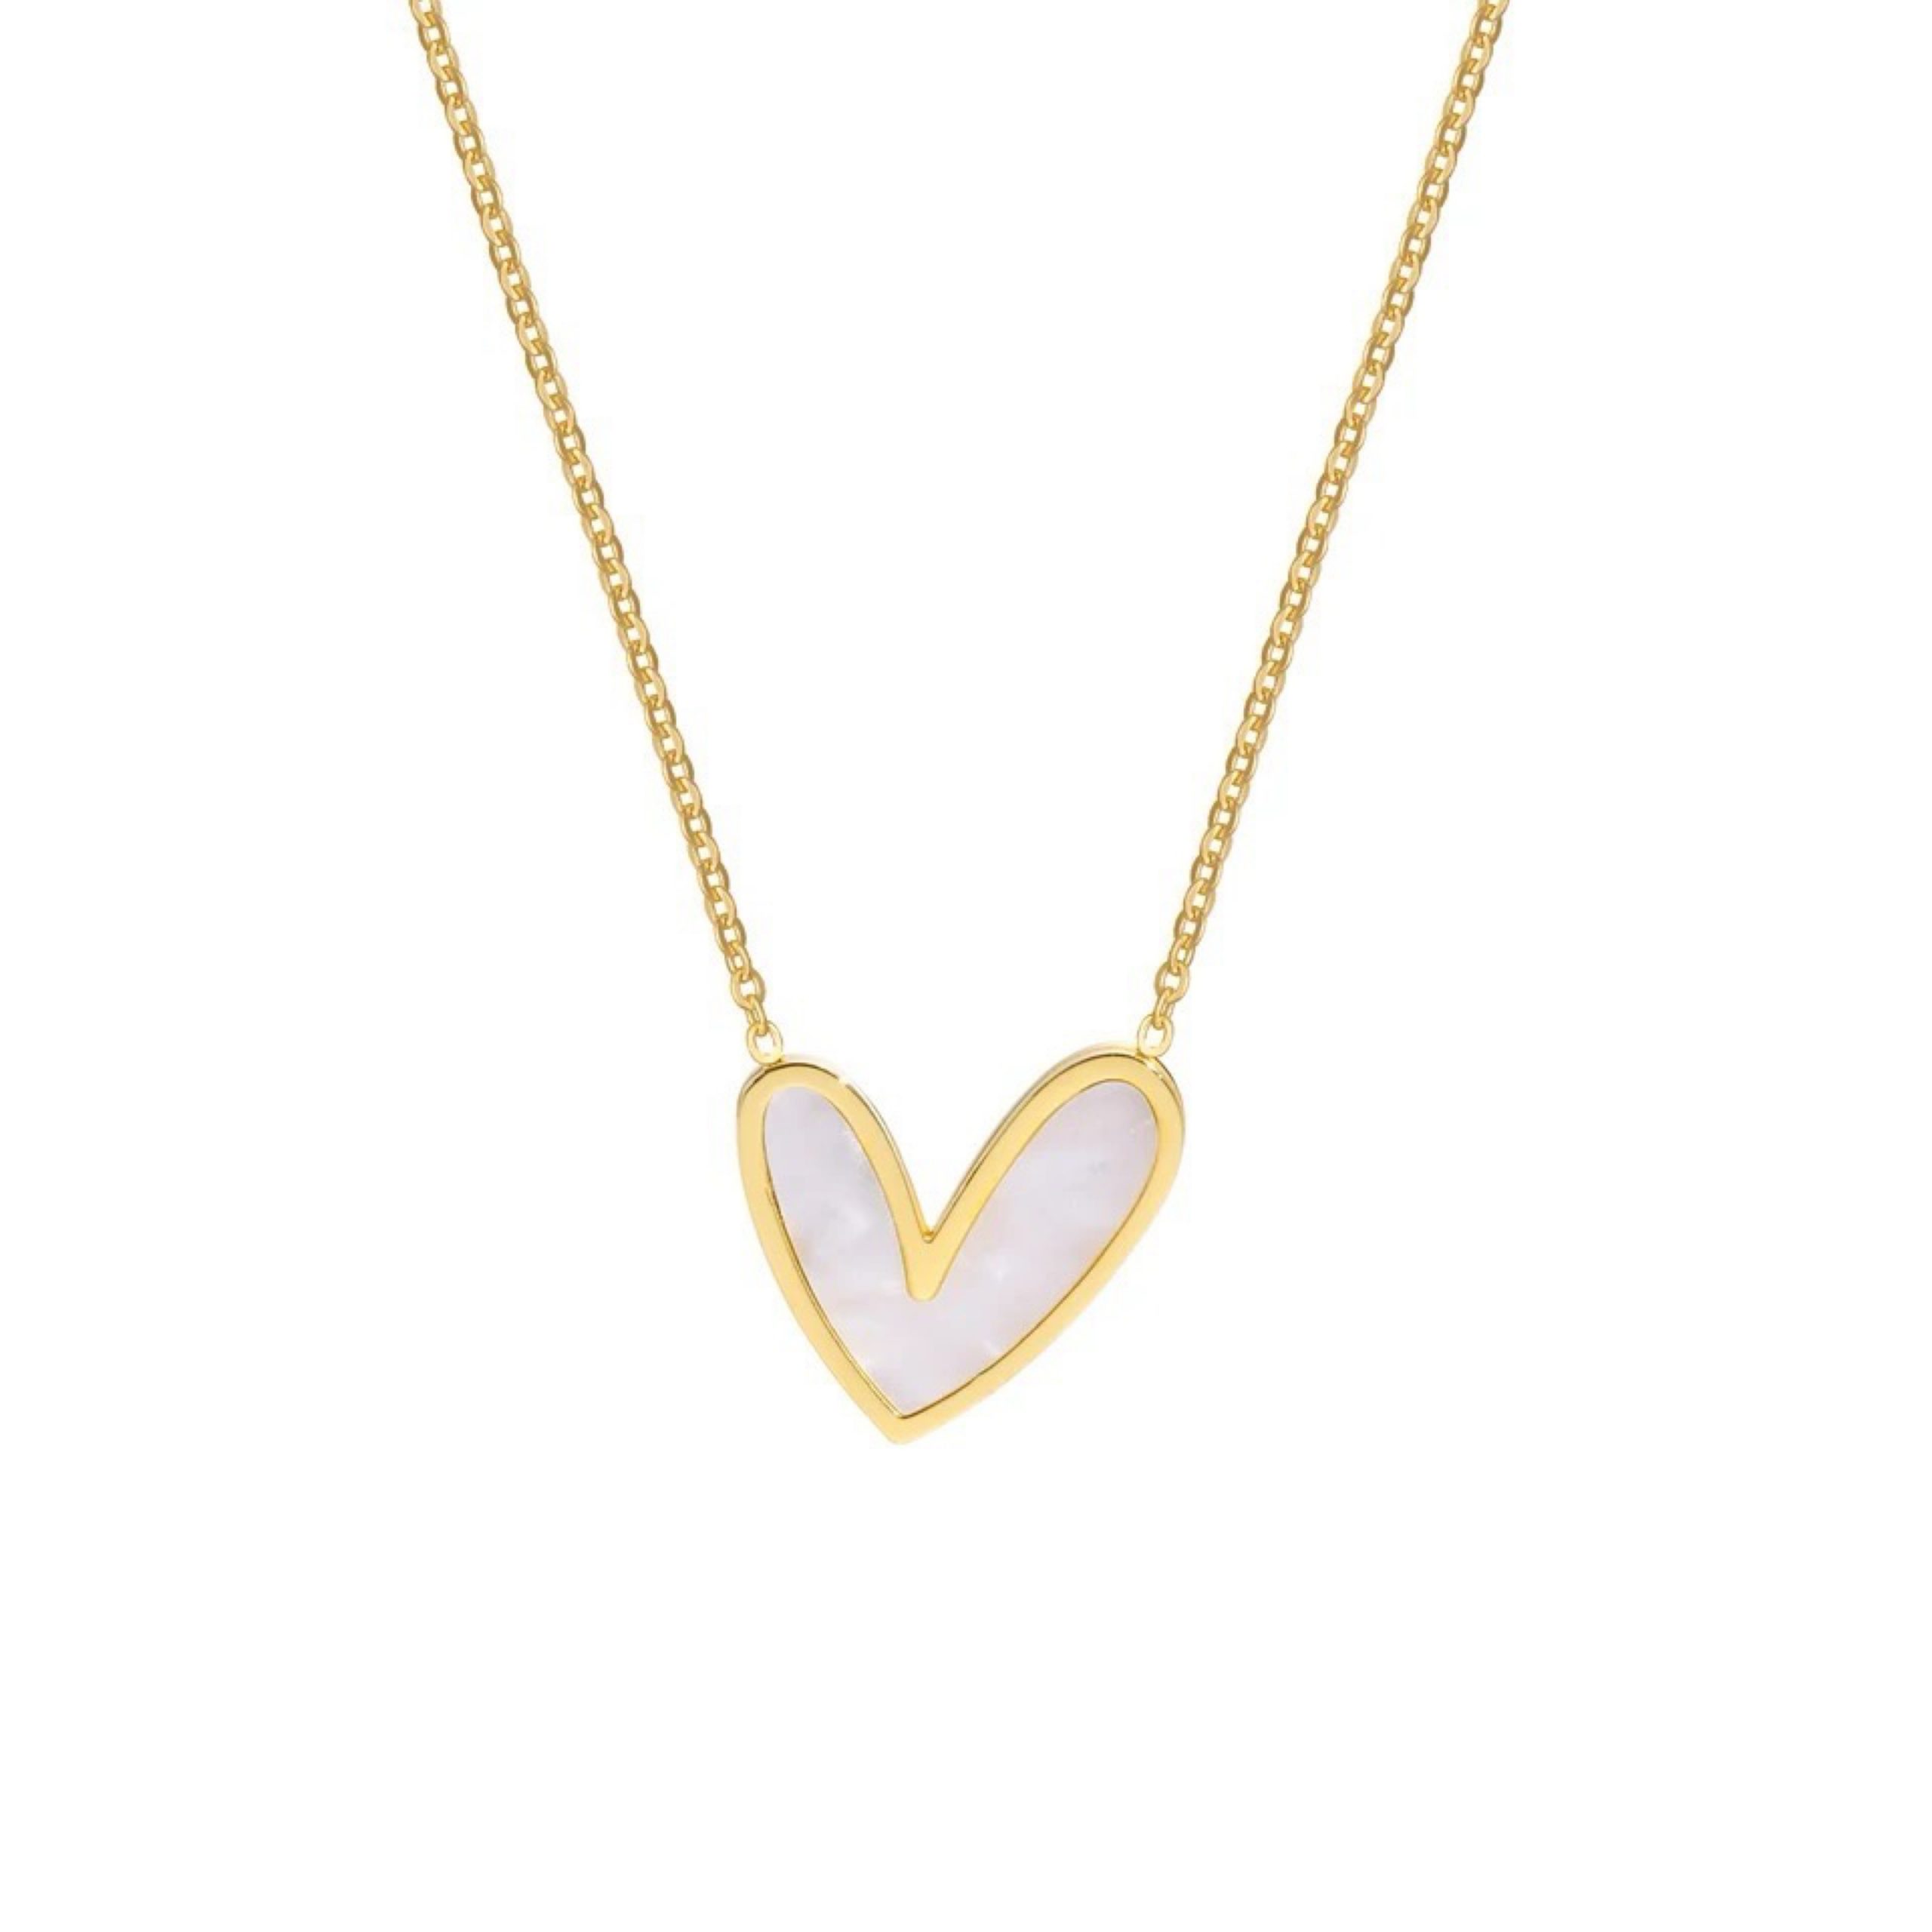 Sahira - Abigail Mother of Pearl Heart Necklace - Kenz Boutique